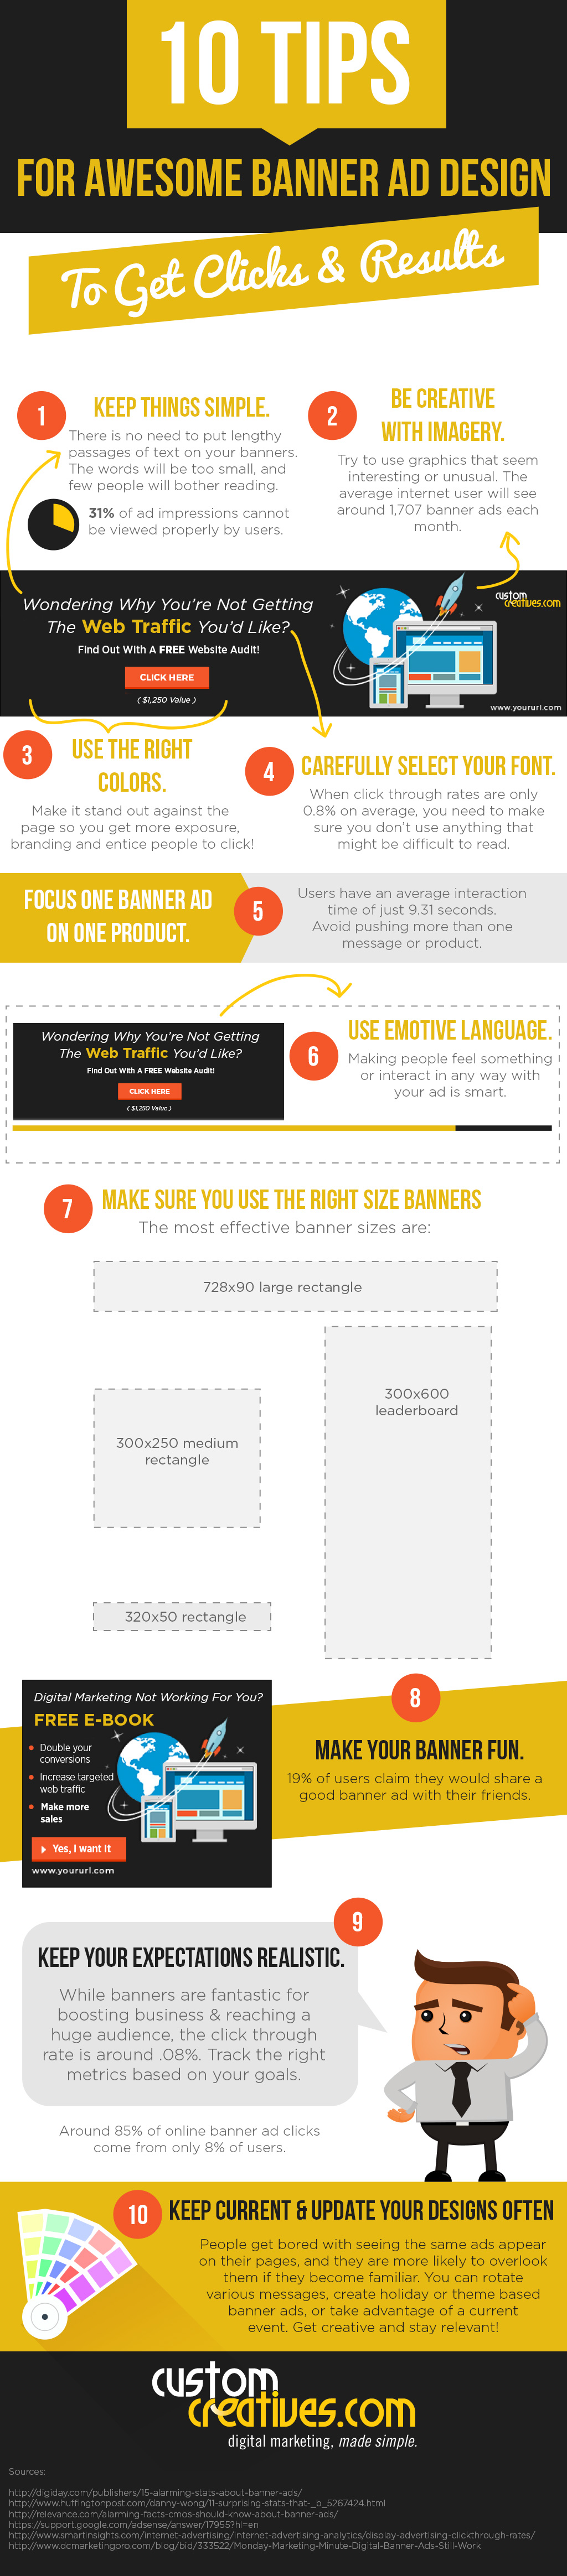 Banner Ad Design Tips - Infographic